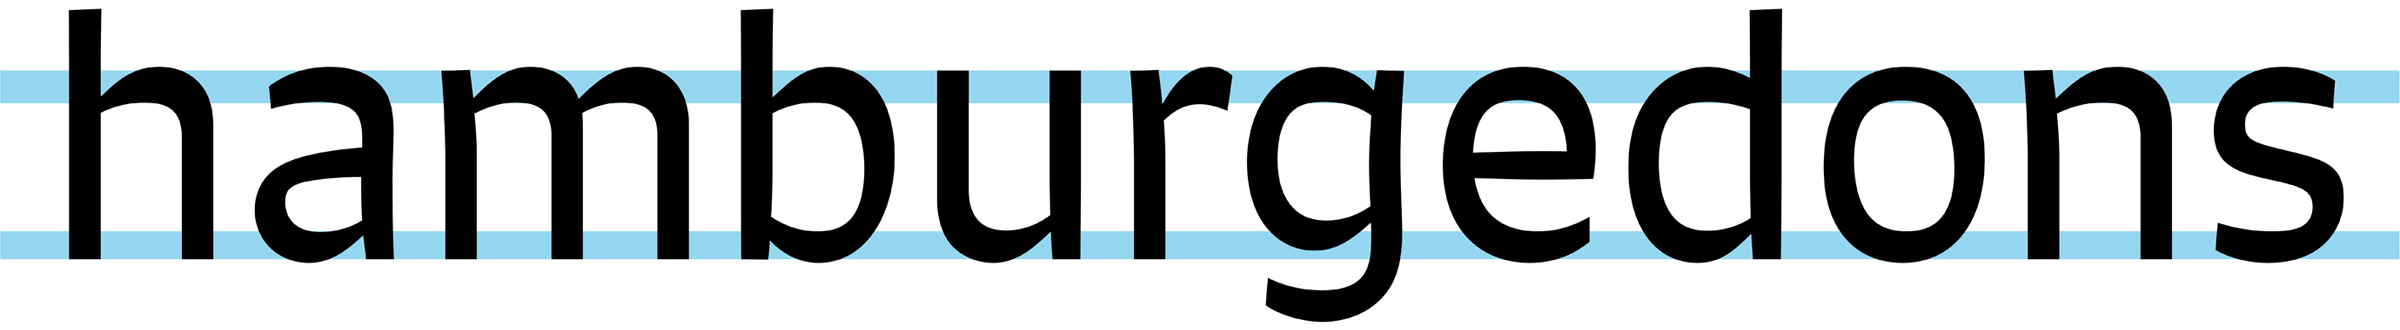 The heavier top and bottom of the letters accentuates the horizontal motion and guide the eye along the letters.